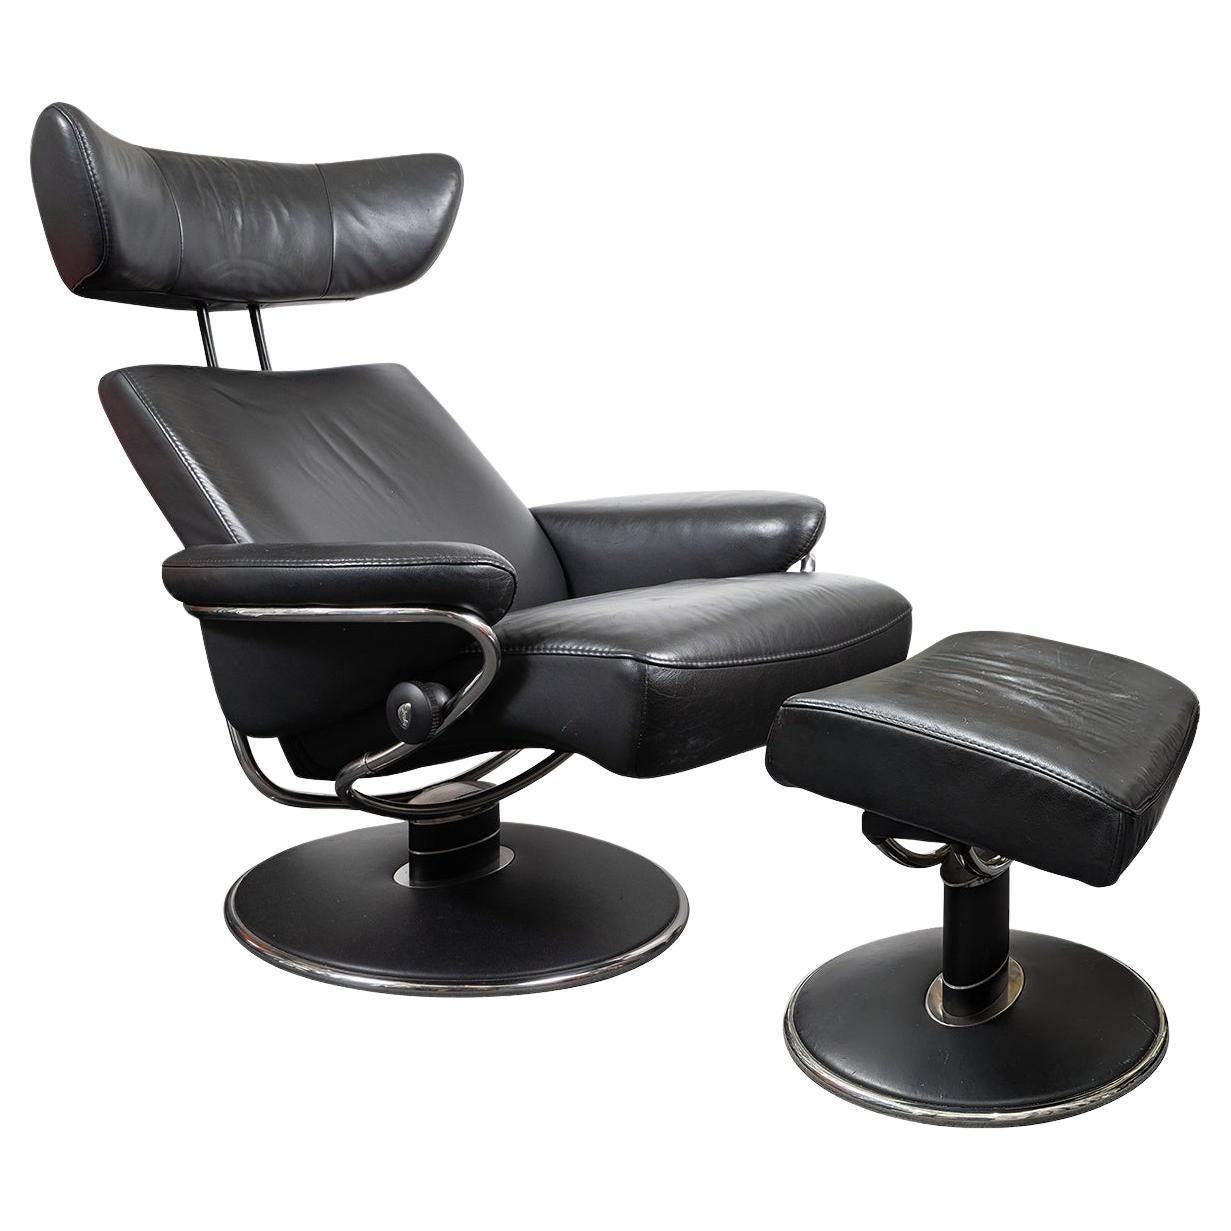 "Jazz" adjustable leather recliner and ottoman set by Ekornes